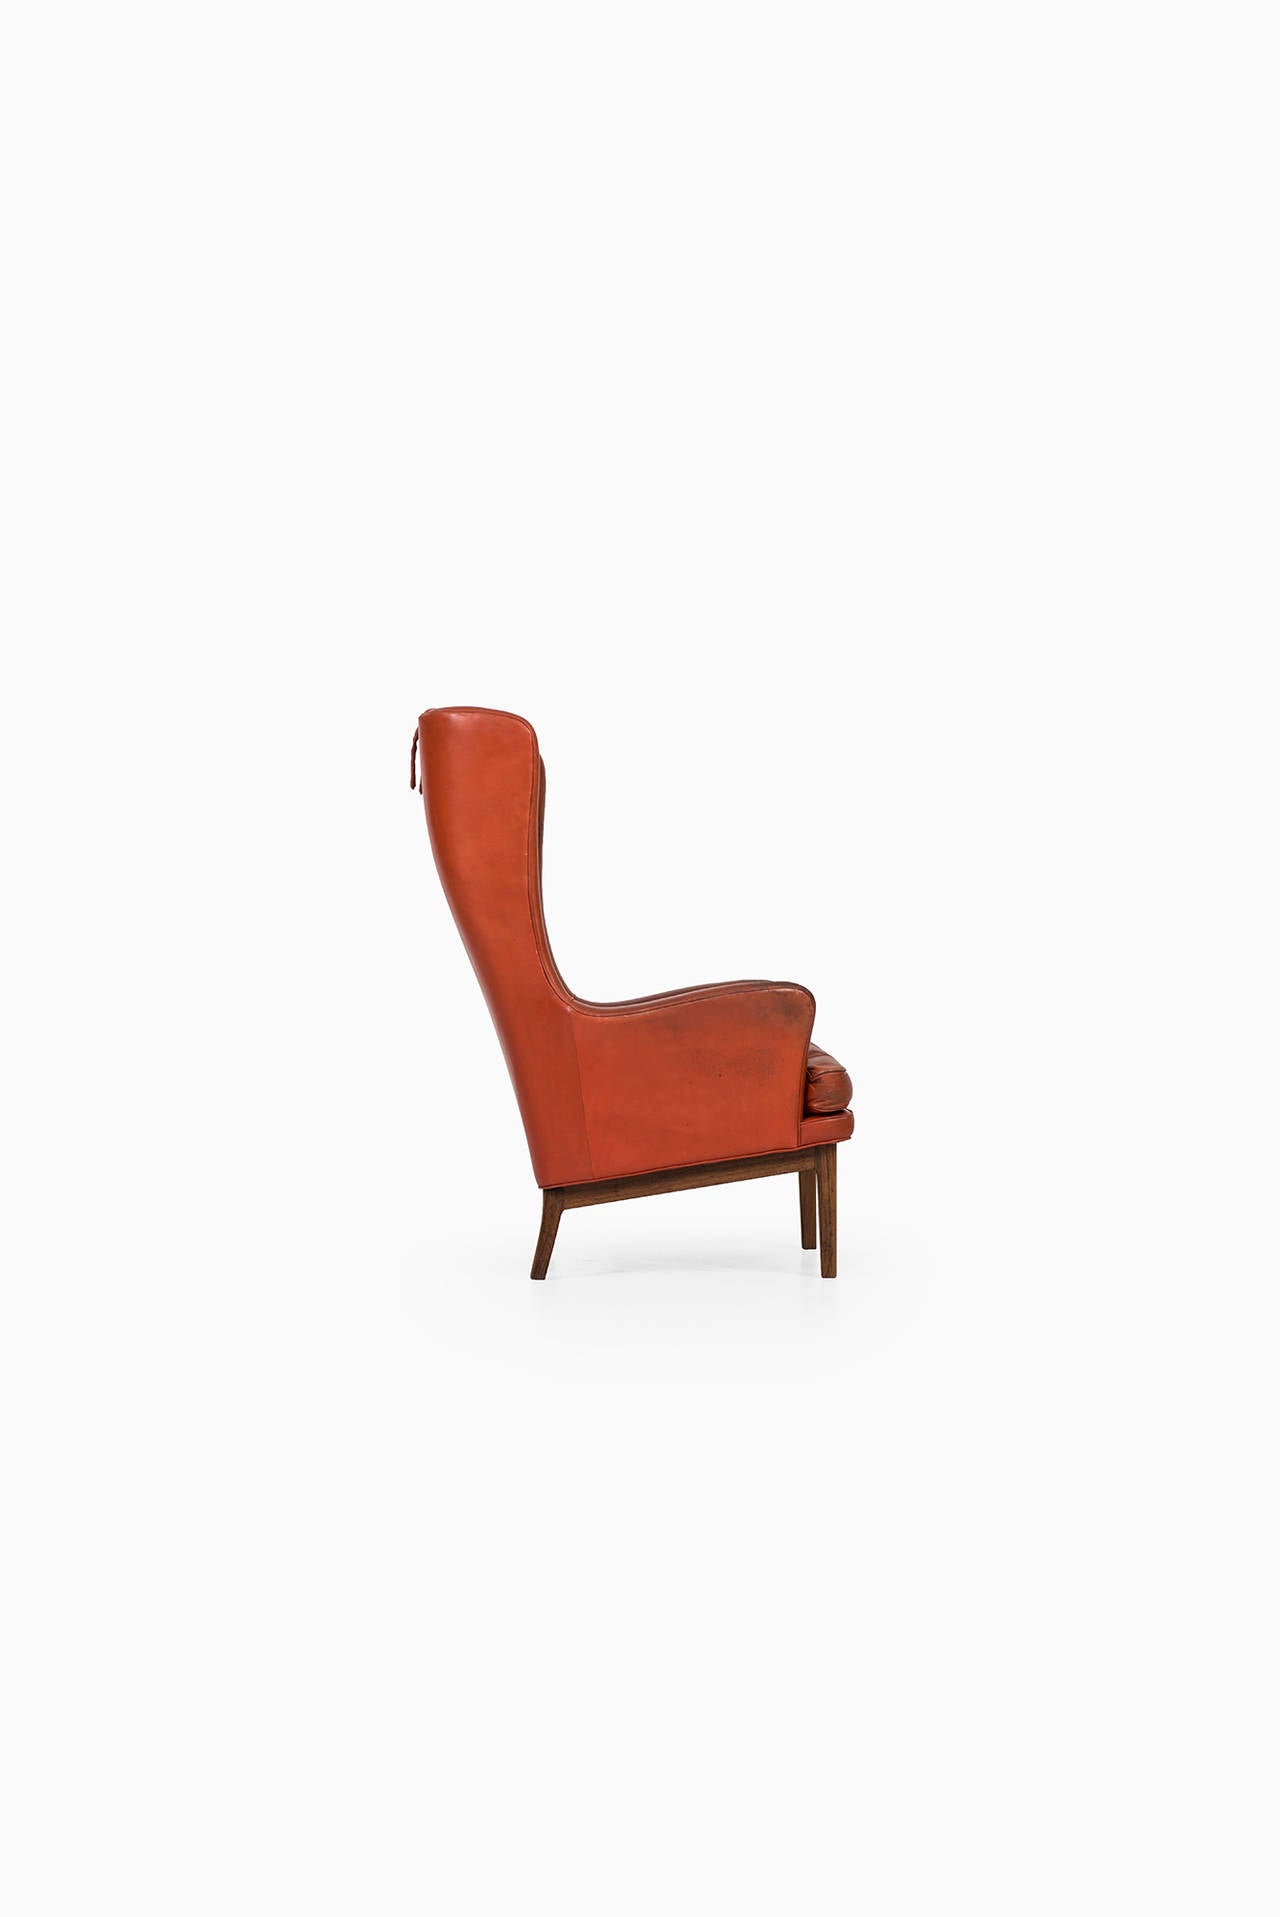 Swedish Arne Norell wingback easy chair in rosewood and leather by Norell AB in Sweden